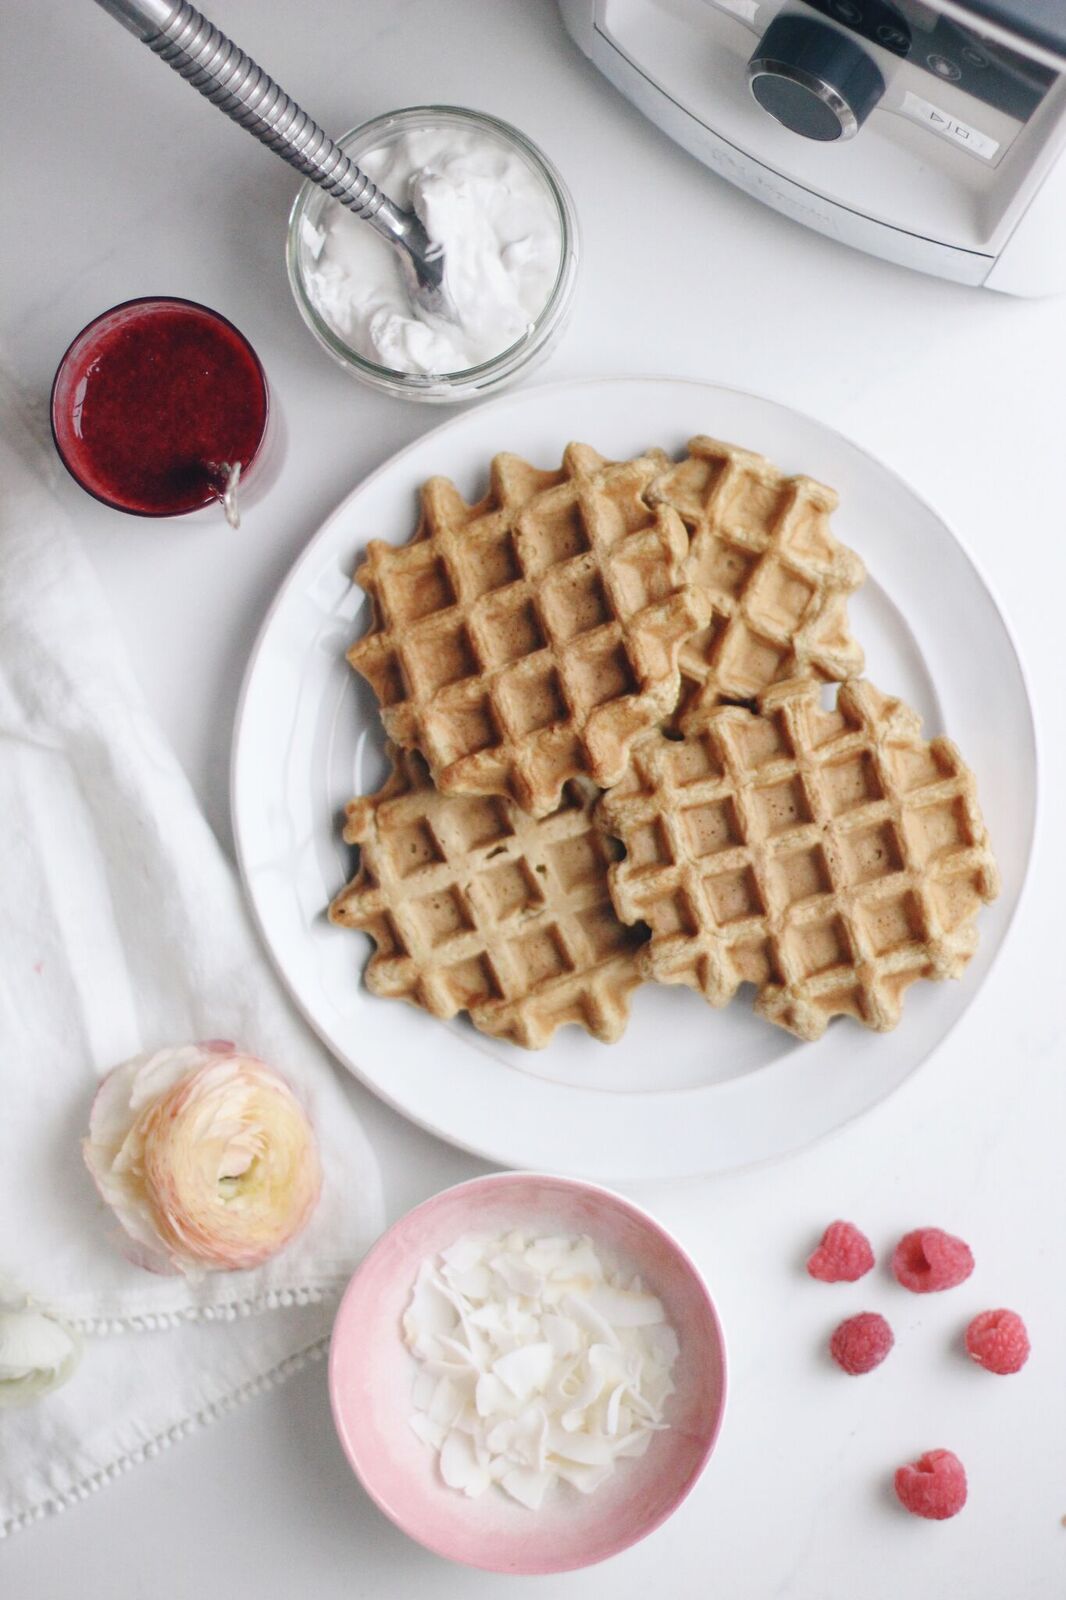 A plate of waffles stacked with raspberry sauce and coconut with the Vitamix blender.